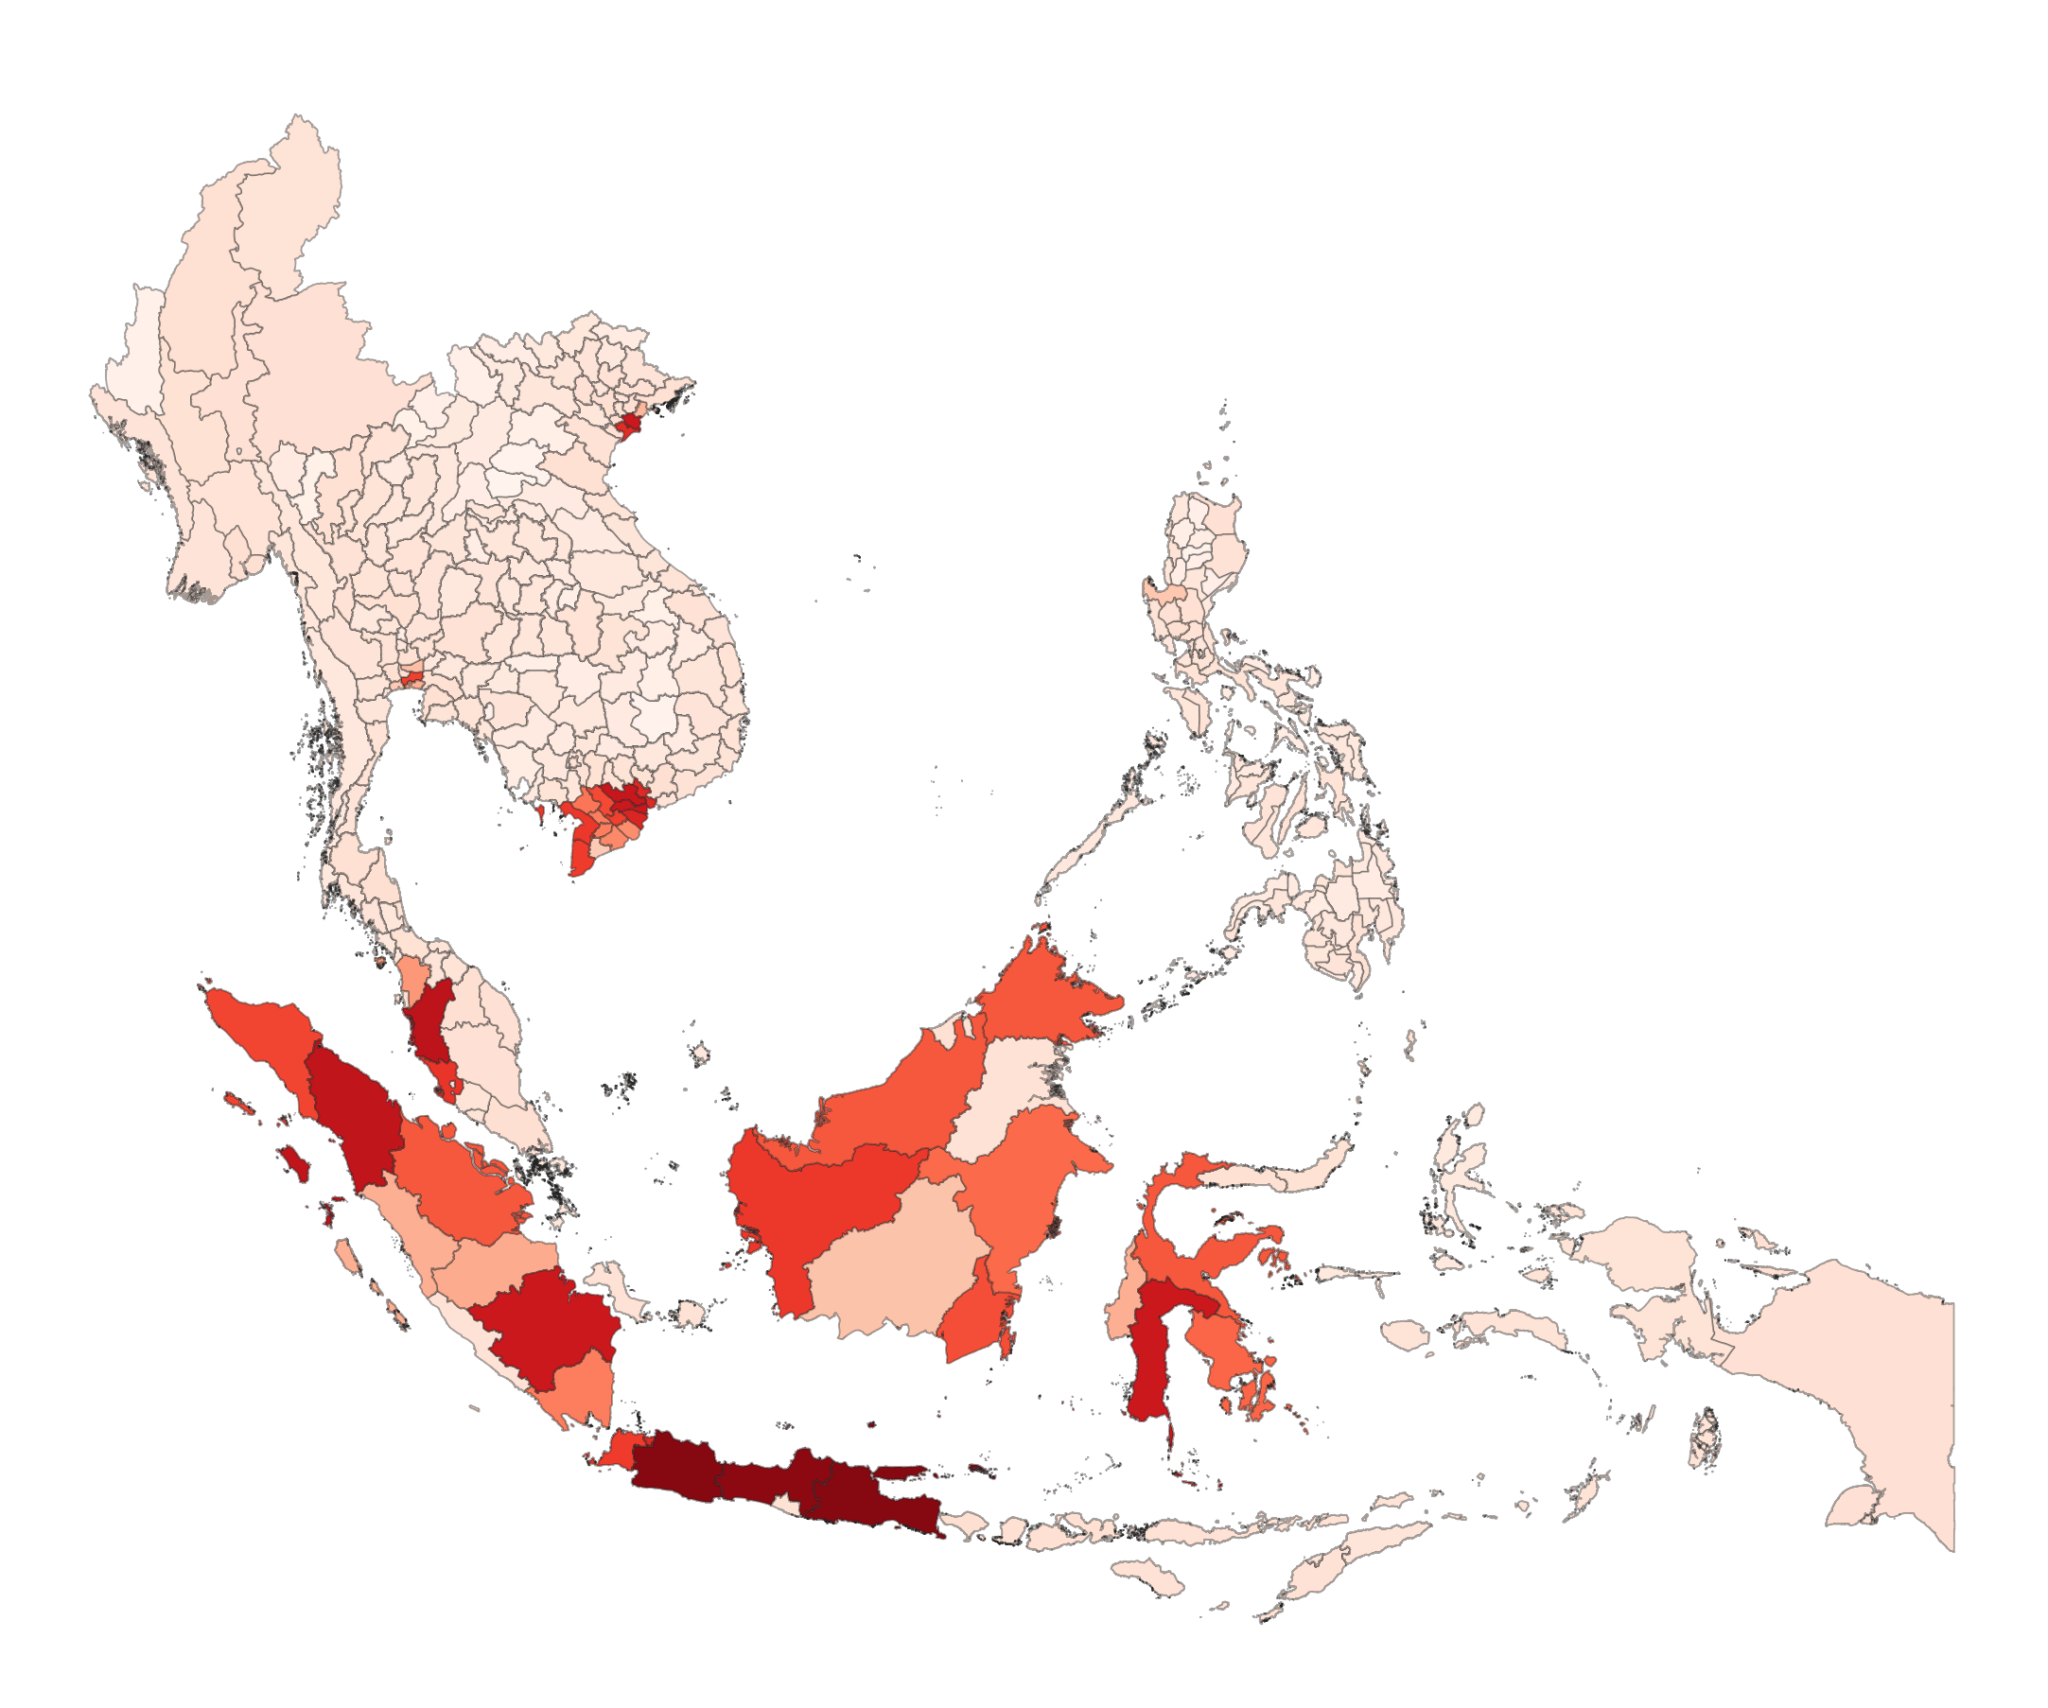 Climate risk in Southeast Asia as an Aggregated Damage Ratio, projected to the year 2050. A focus on Aggregated Damage Ratio foregrounds large states and provinces with extensive built-up areas. Other parts of Southeast Asia rank among the highest in the world both for Average Damage Ratio and for the increase in damage from 1990 to 2050. There are a number of provinces that rank high for both Aggregated and Average Damage Ratios in 2050. Many of these are in Vietnam, including Ho Chi Minh City and Mekong Delta provinces like Long An, Vĩnh Long, Bến Tre, and Tiền Giang. The Mekong Delta is less than two metres above sea level on average, is home to 17 million people and produces most of Vietnam’s food. Other Southeast Asian provinces that rank high for both Aggregated and Average Damage Ratio include Jakarta, West Kalimantan (Kalimantan Barat) and Southern Sumatra (Sumatra Selatan). Southeast Asia experiences the greatest escalation in damage from 1990 to 2050. Among the places experiencing the highest percentage increases in damage to 2050 are islands in Mindanao in the Philippines, including the Sulu Archipelago, Tawi-Tawi and Camiguin. Graphic: XDI